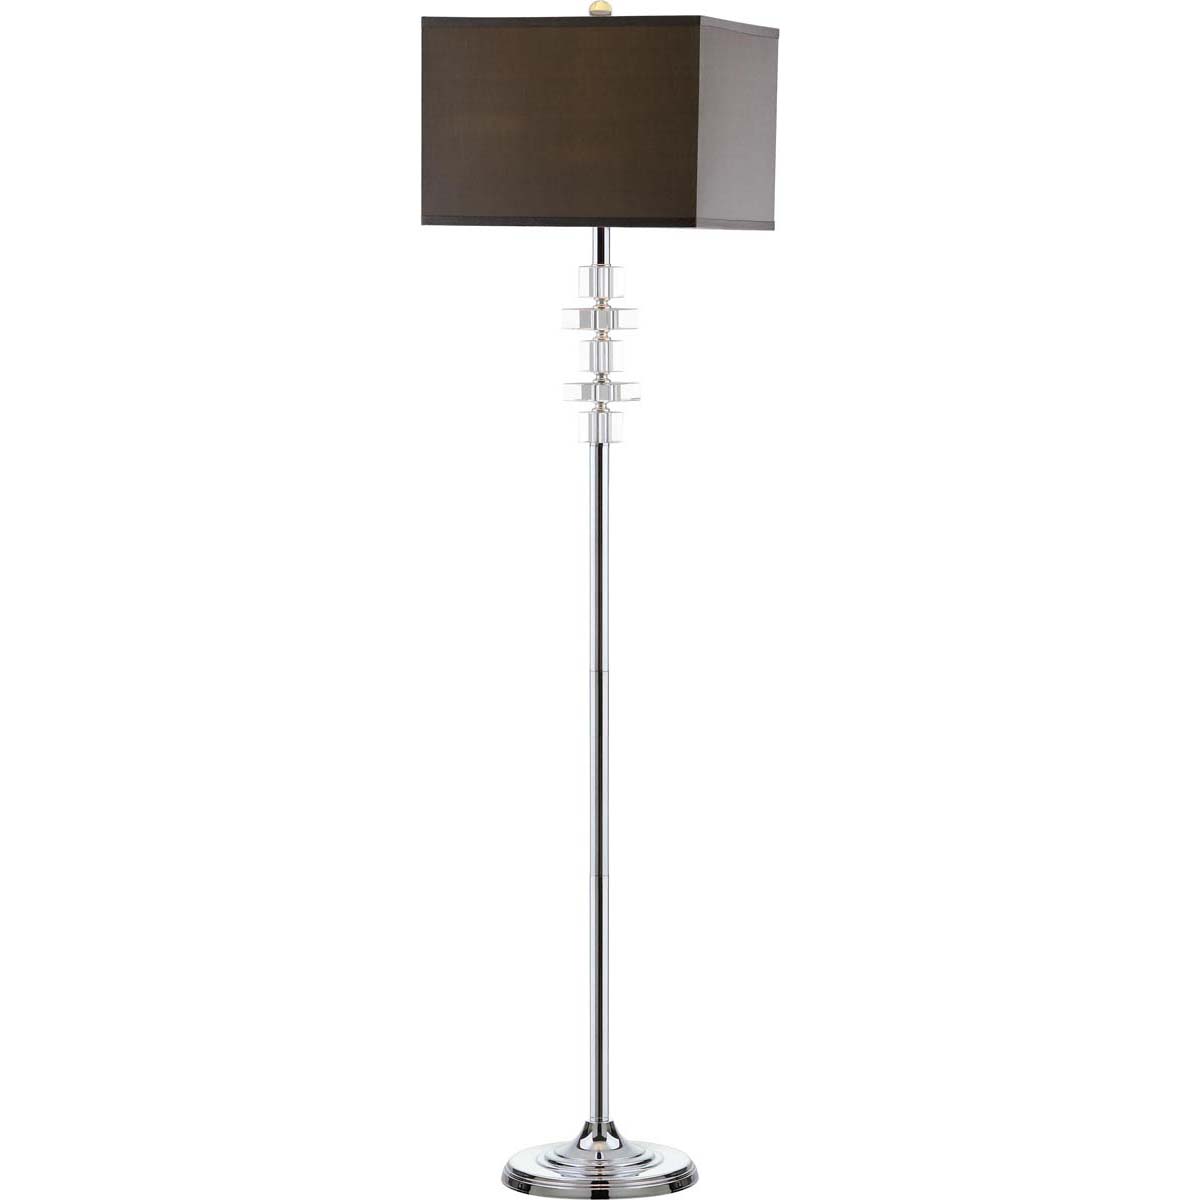 Safavieh Times 60.5 Inch H Square Floor Lamp, LIT4174 - Clear/Chrome